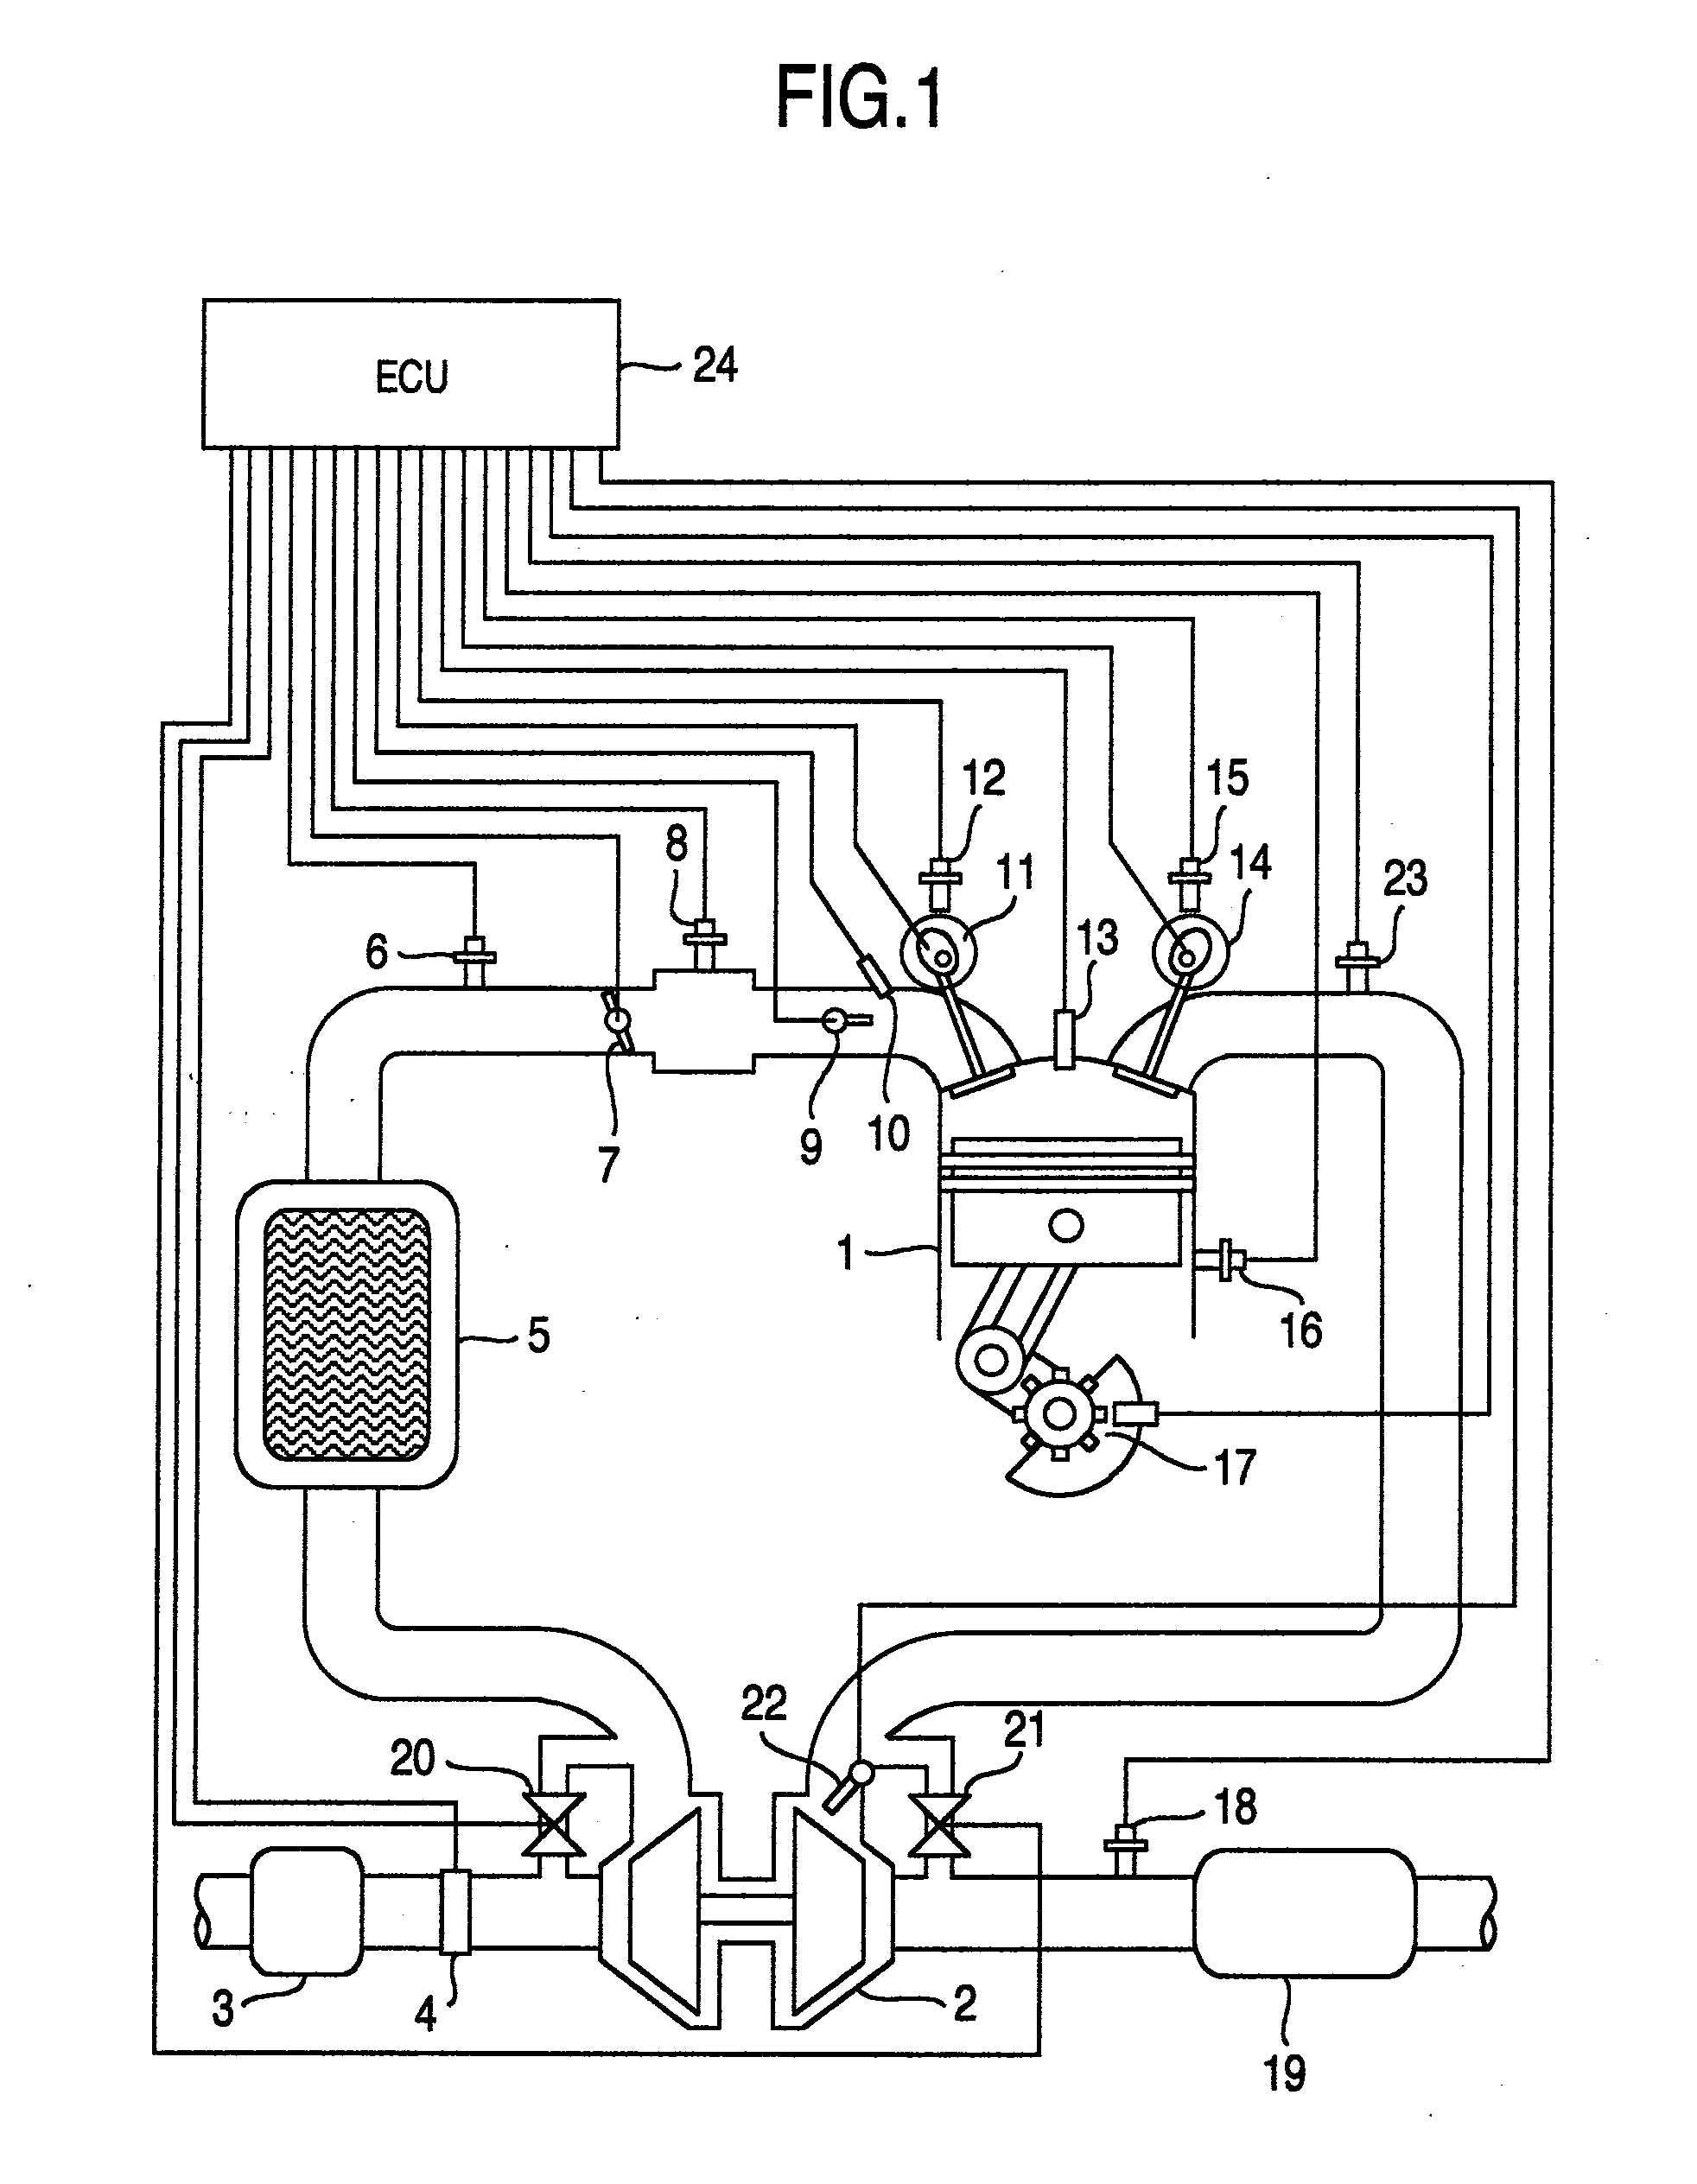 Method and Apparatus for Controlling an Internal Combustion Engine